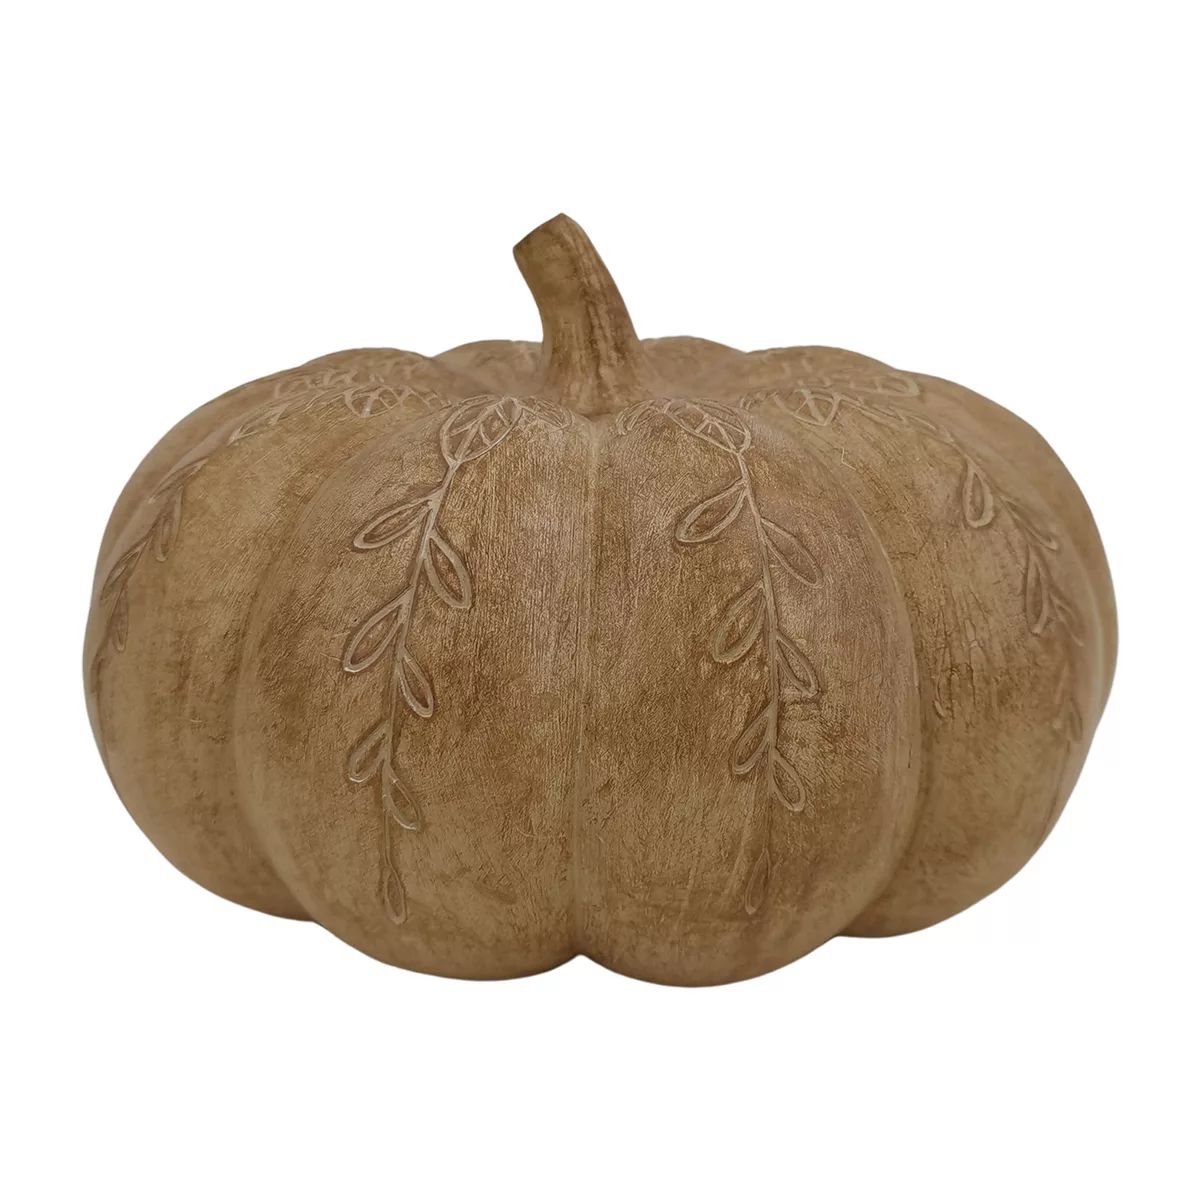 Celebrate Together™ Fall Small Carved Pumpkin Table Decor | Kohl's